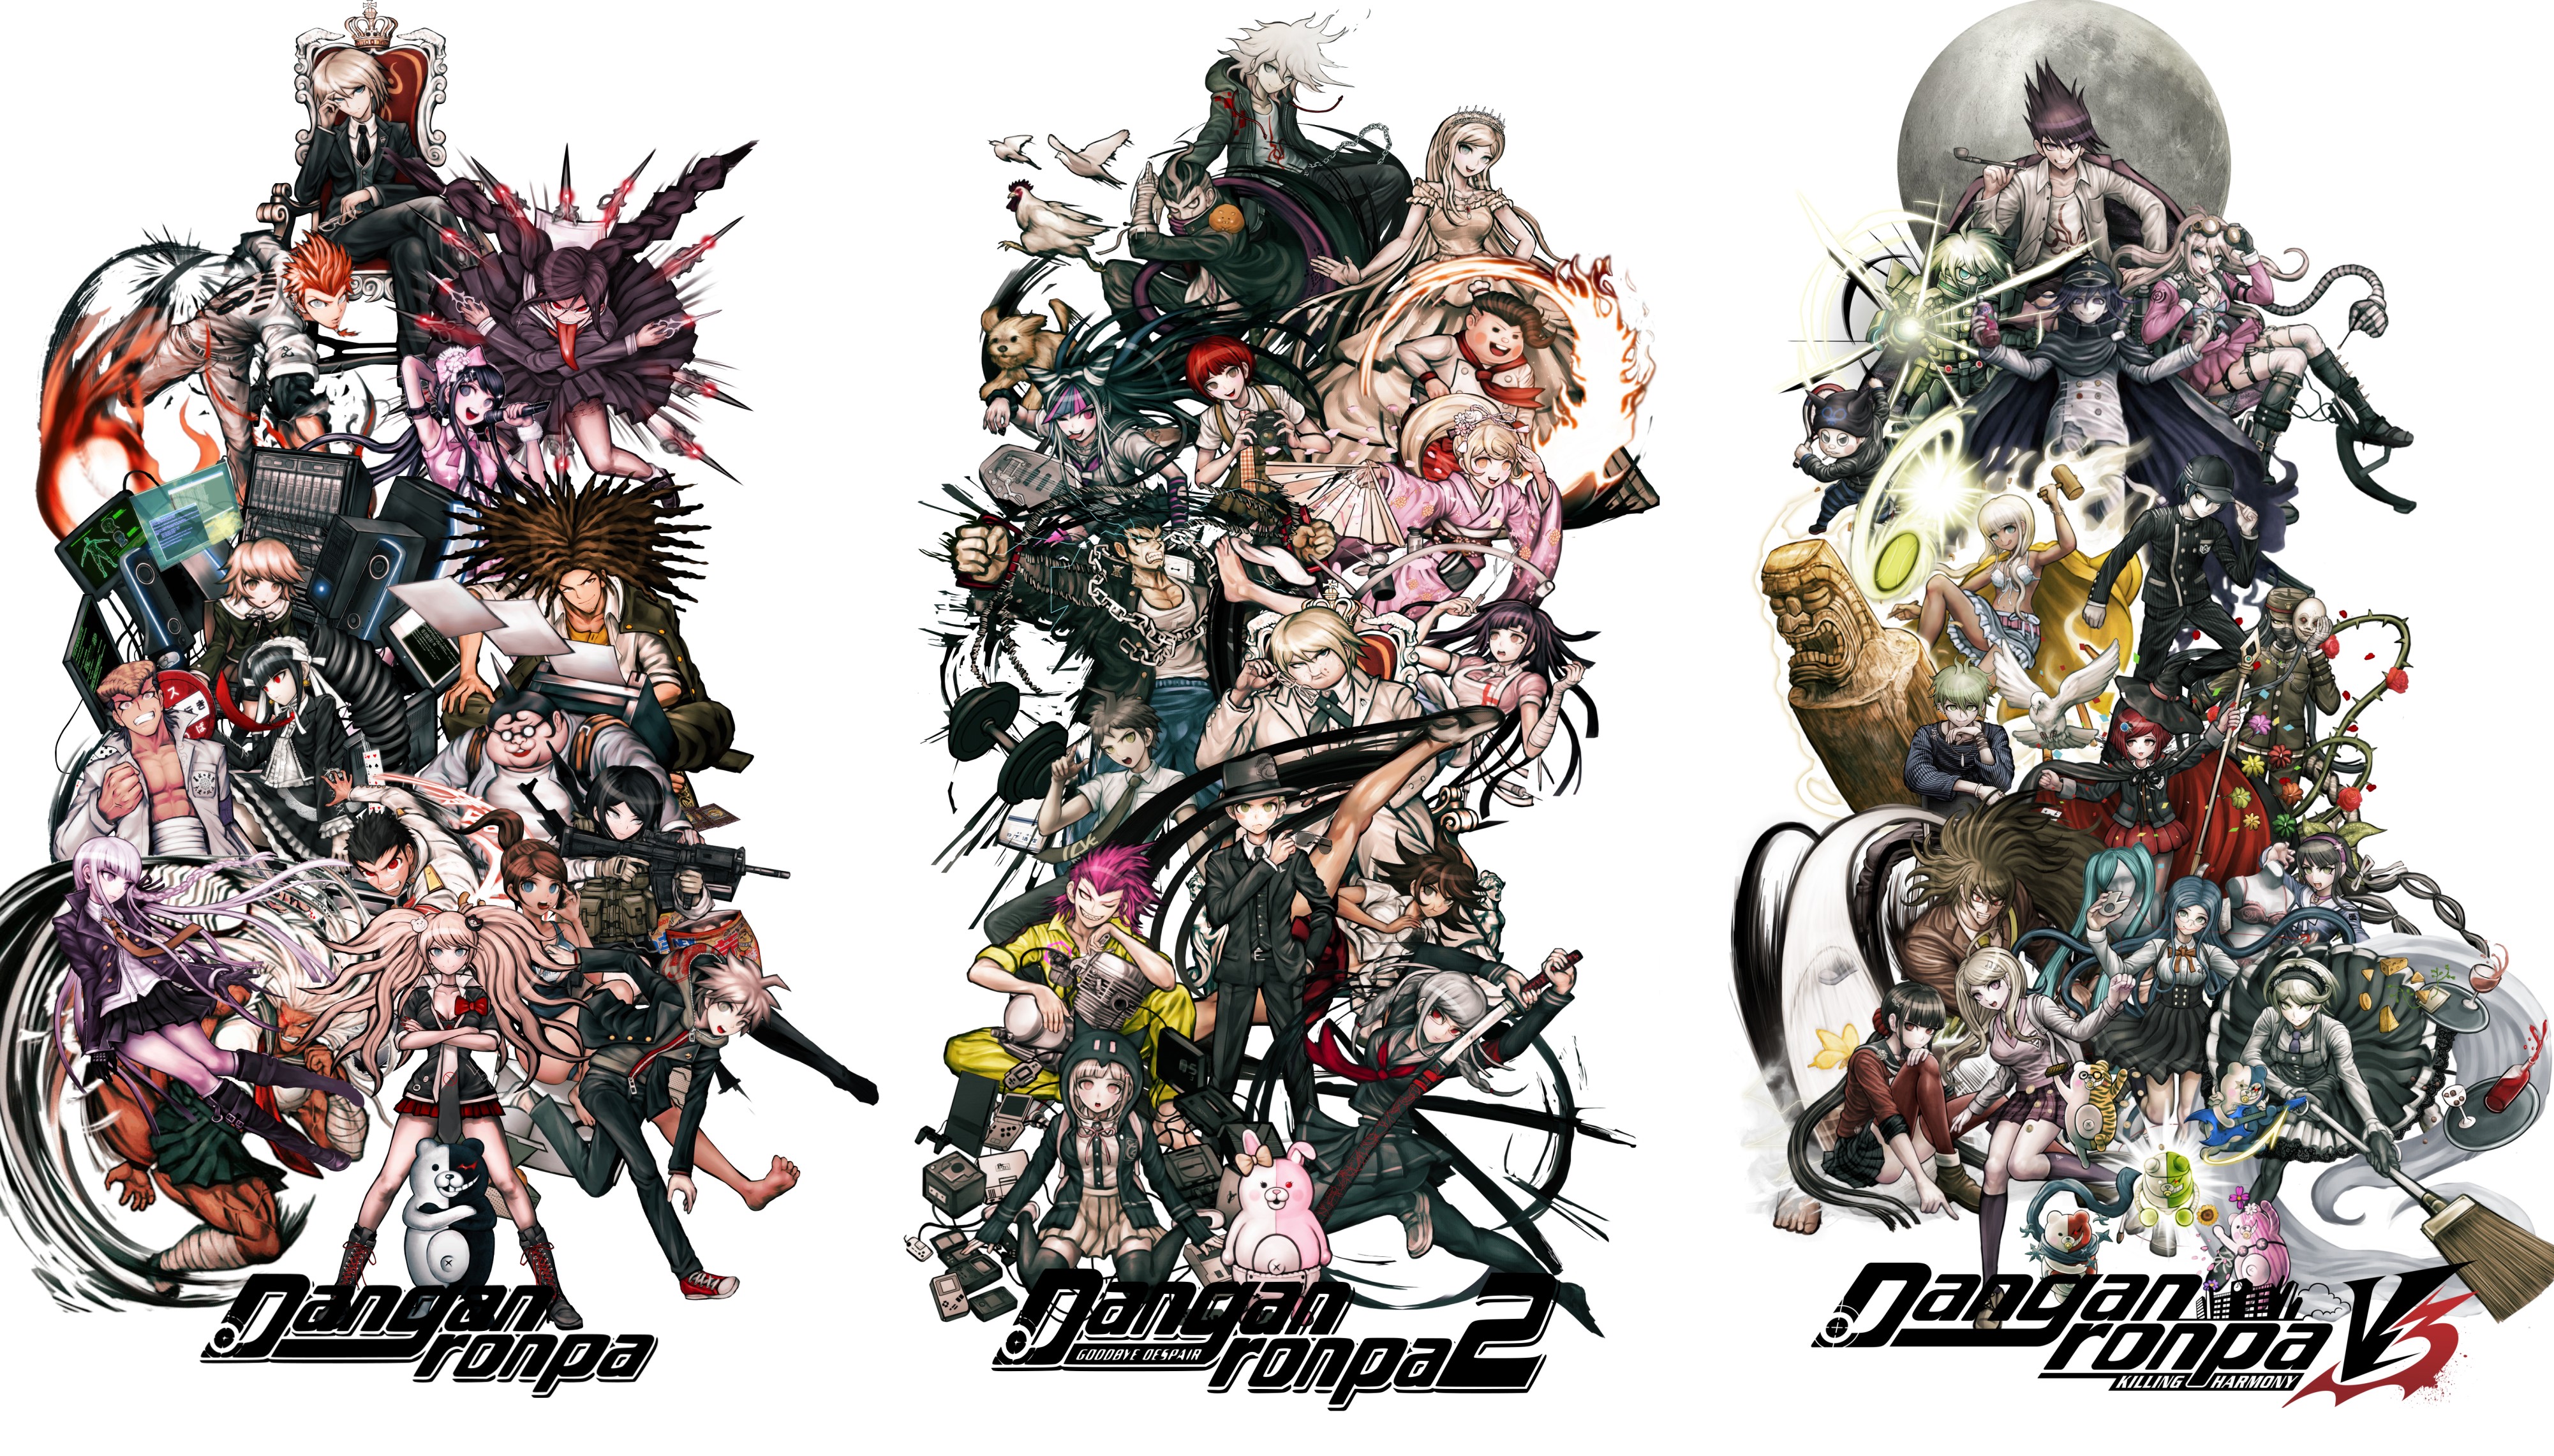 Here you have a wallpaper with all the main game characters.: danganronpa